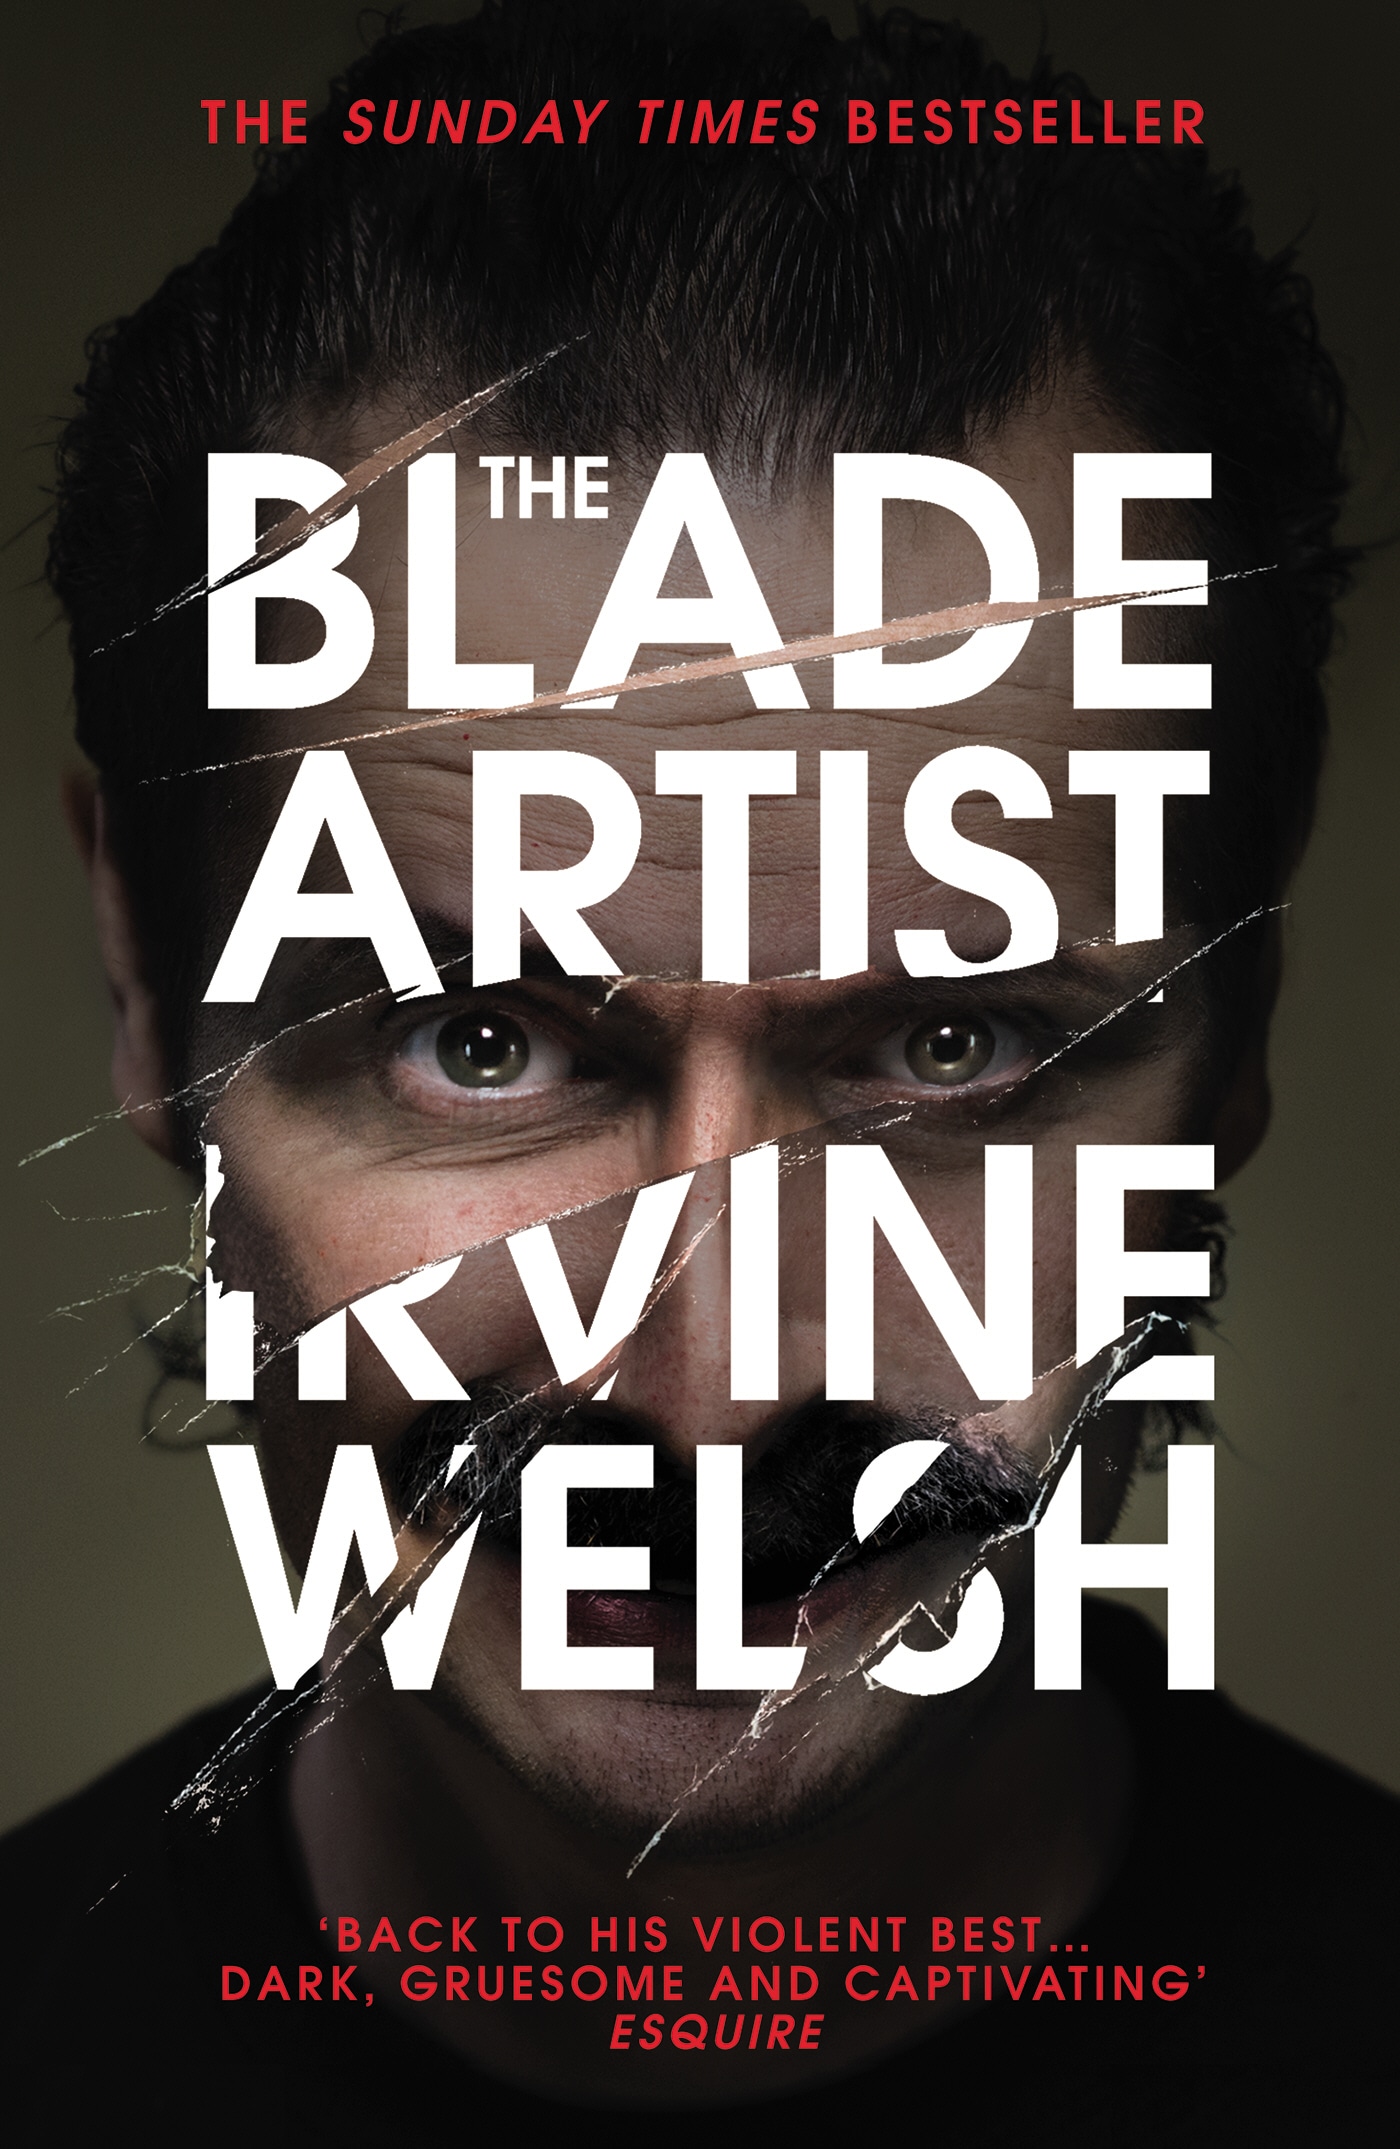 Book “The Blade Artist” by Irvine Welsh — April 6, 2017